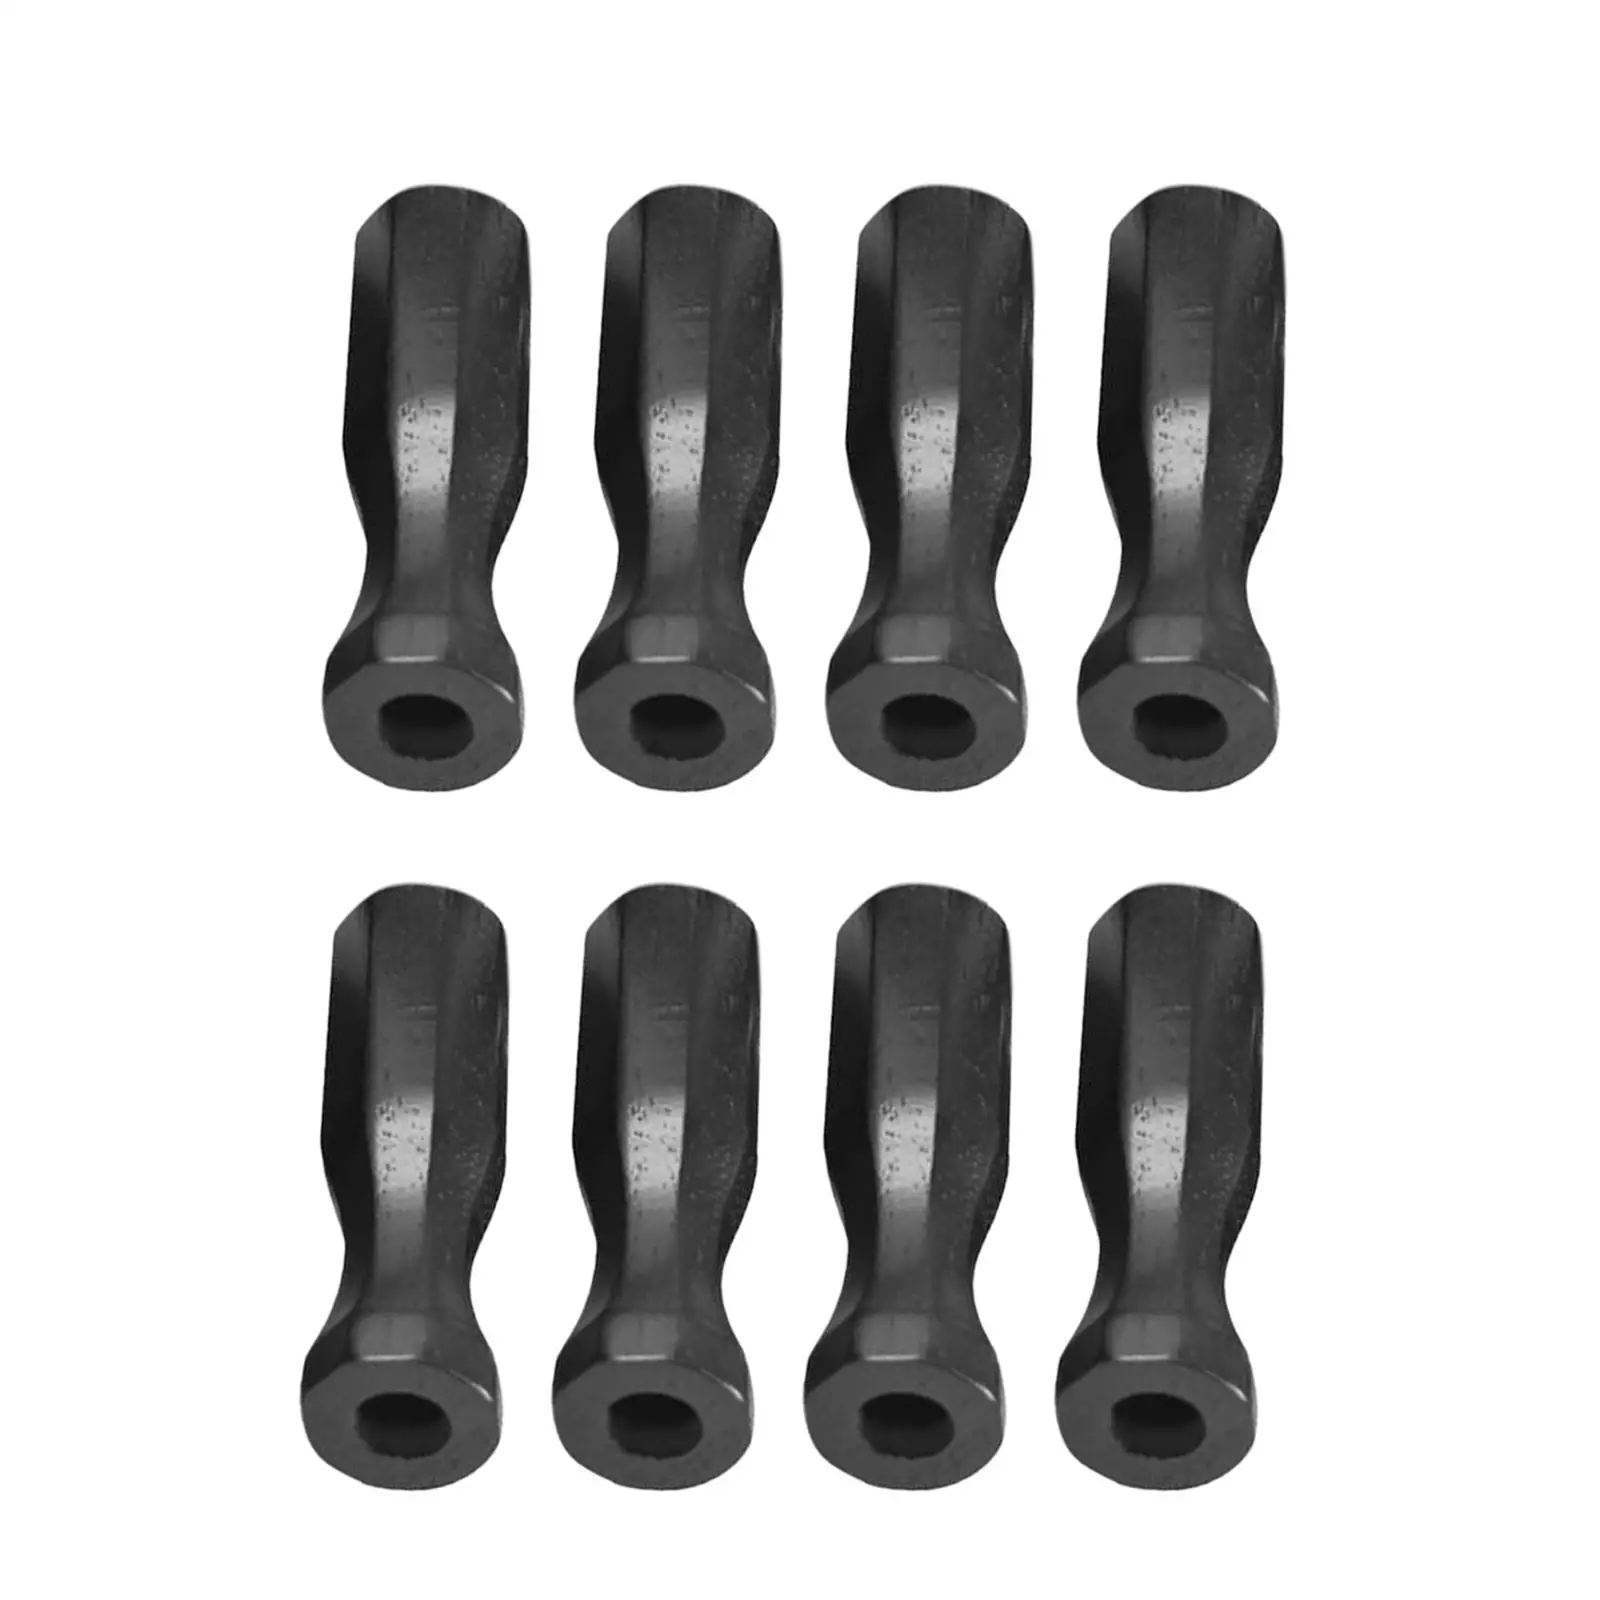 8Pcs Soccer Table Handles Foosball Handle Grip Non Slip, Portable Replacements for Children Soccer Machine Table Soccer